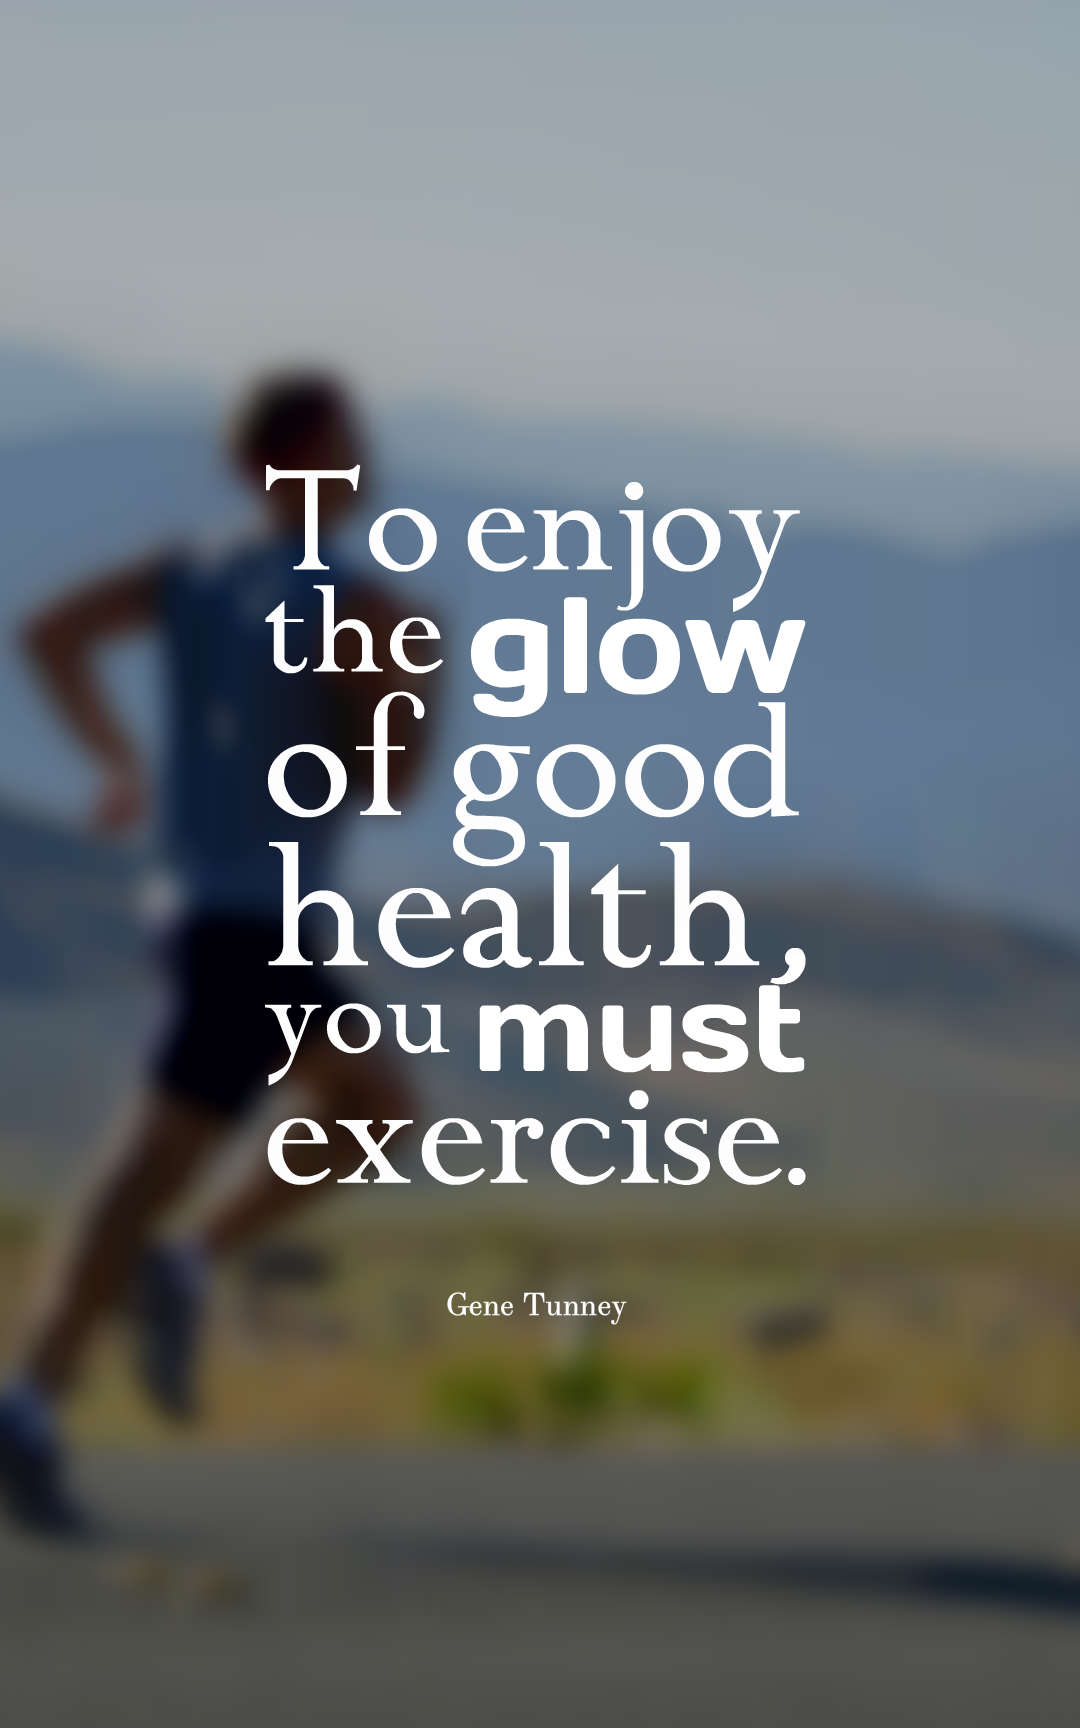 To enjoy the glow of good health you must